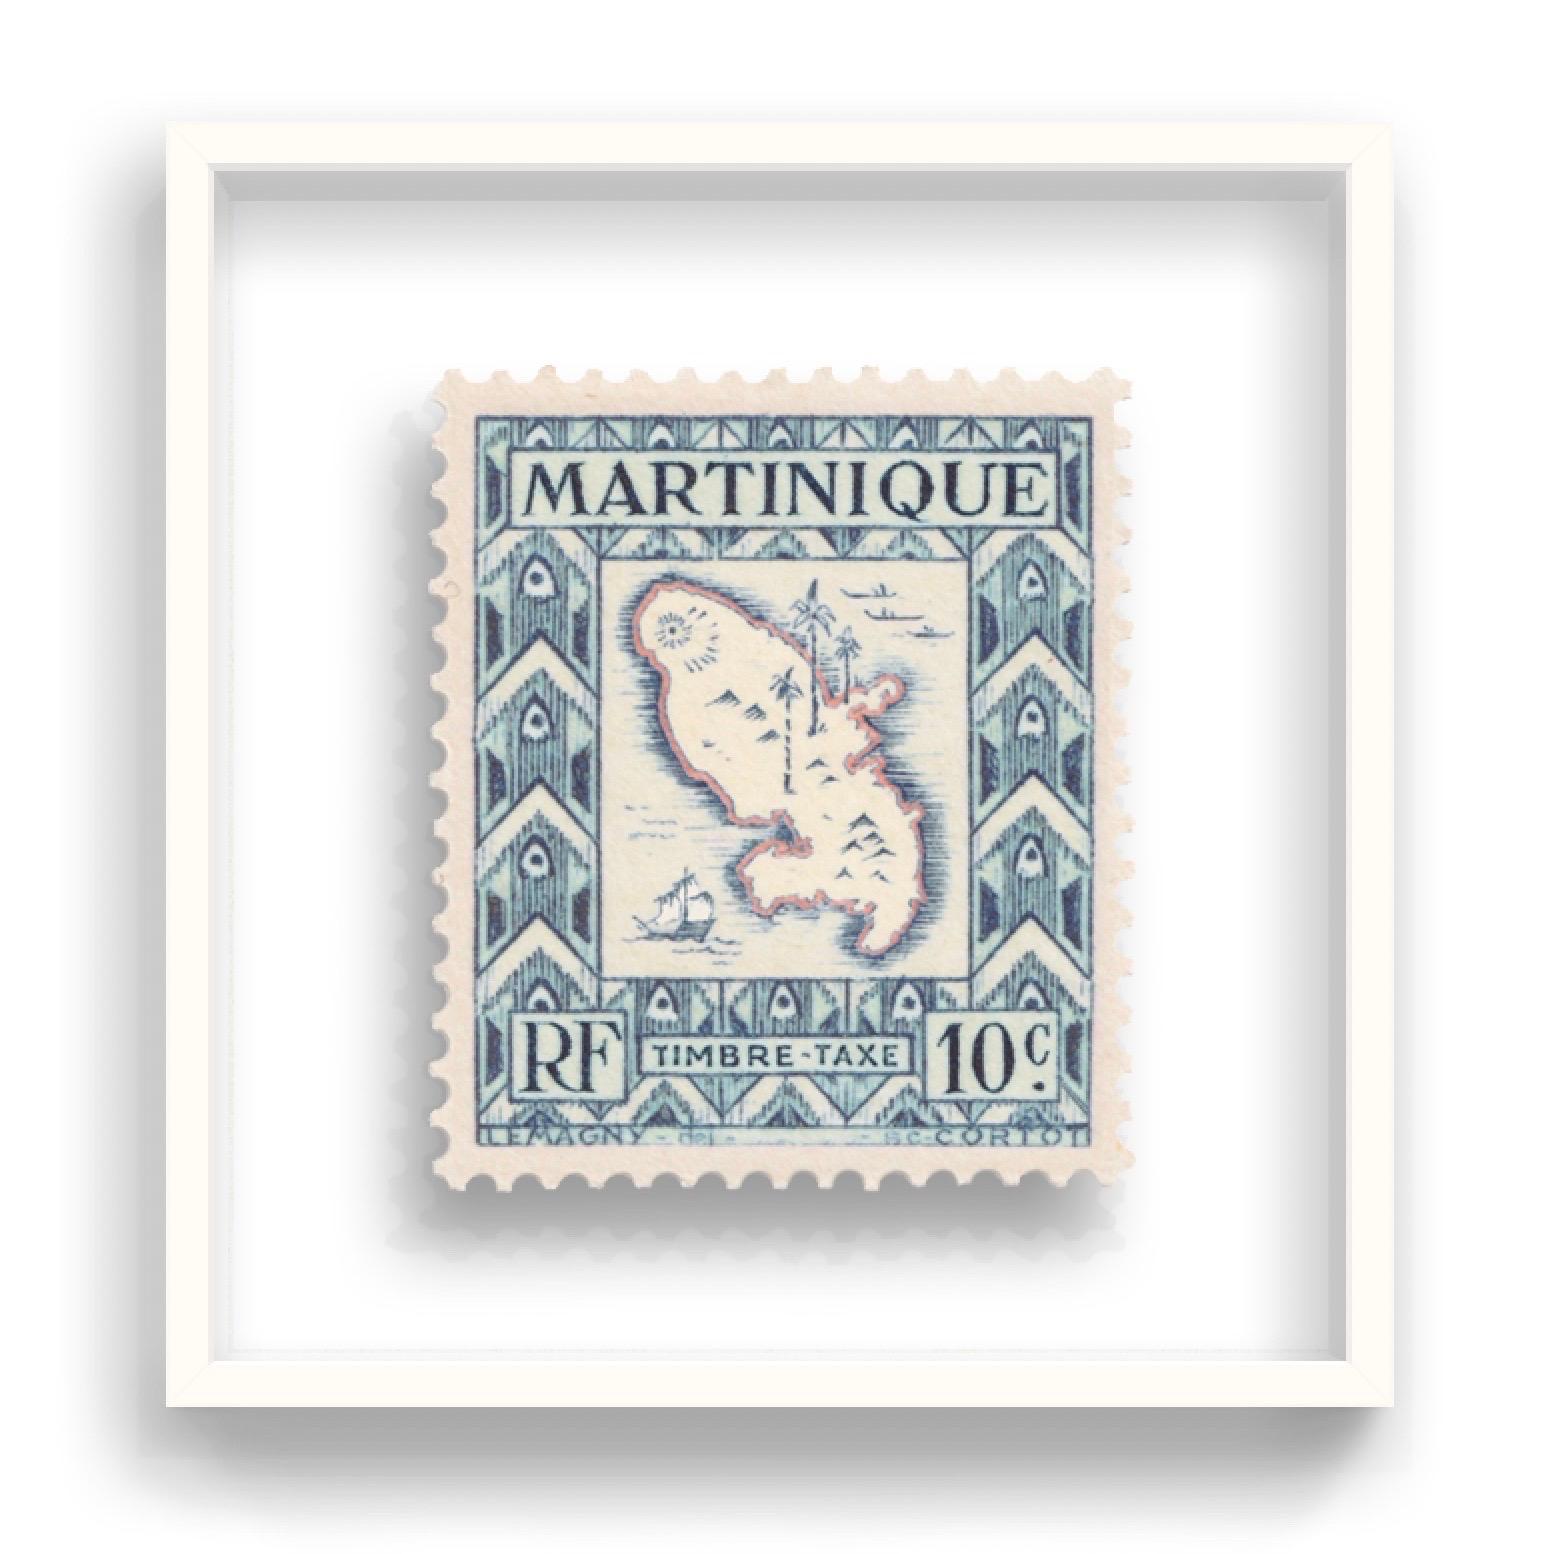 Guy Gee, Martinique  (medium)

Hand-engraved print on 350gsm on G.F Smith card
53 x 56cm (20 4/5 x 22 2/5 in)
Frame included 
Edition of 75 

Each artwork by Guy had been digitally reimagined from an original postage stamp. Cut out and finished by